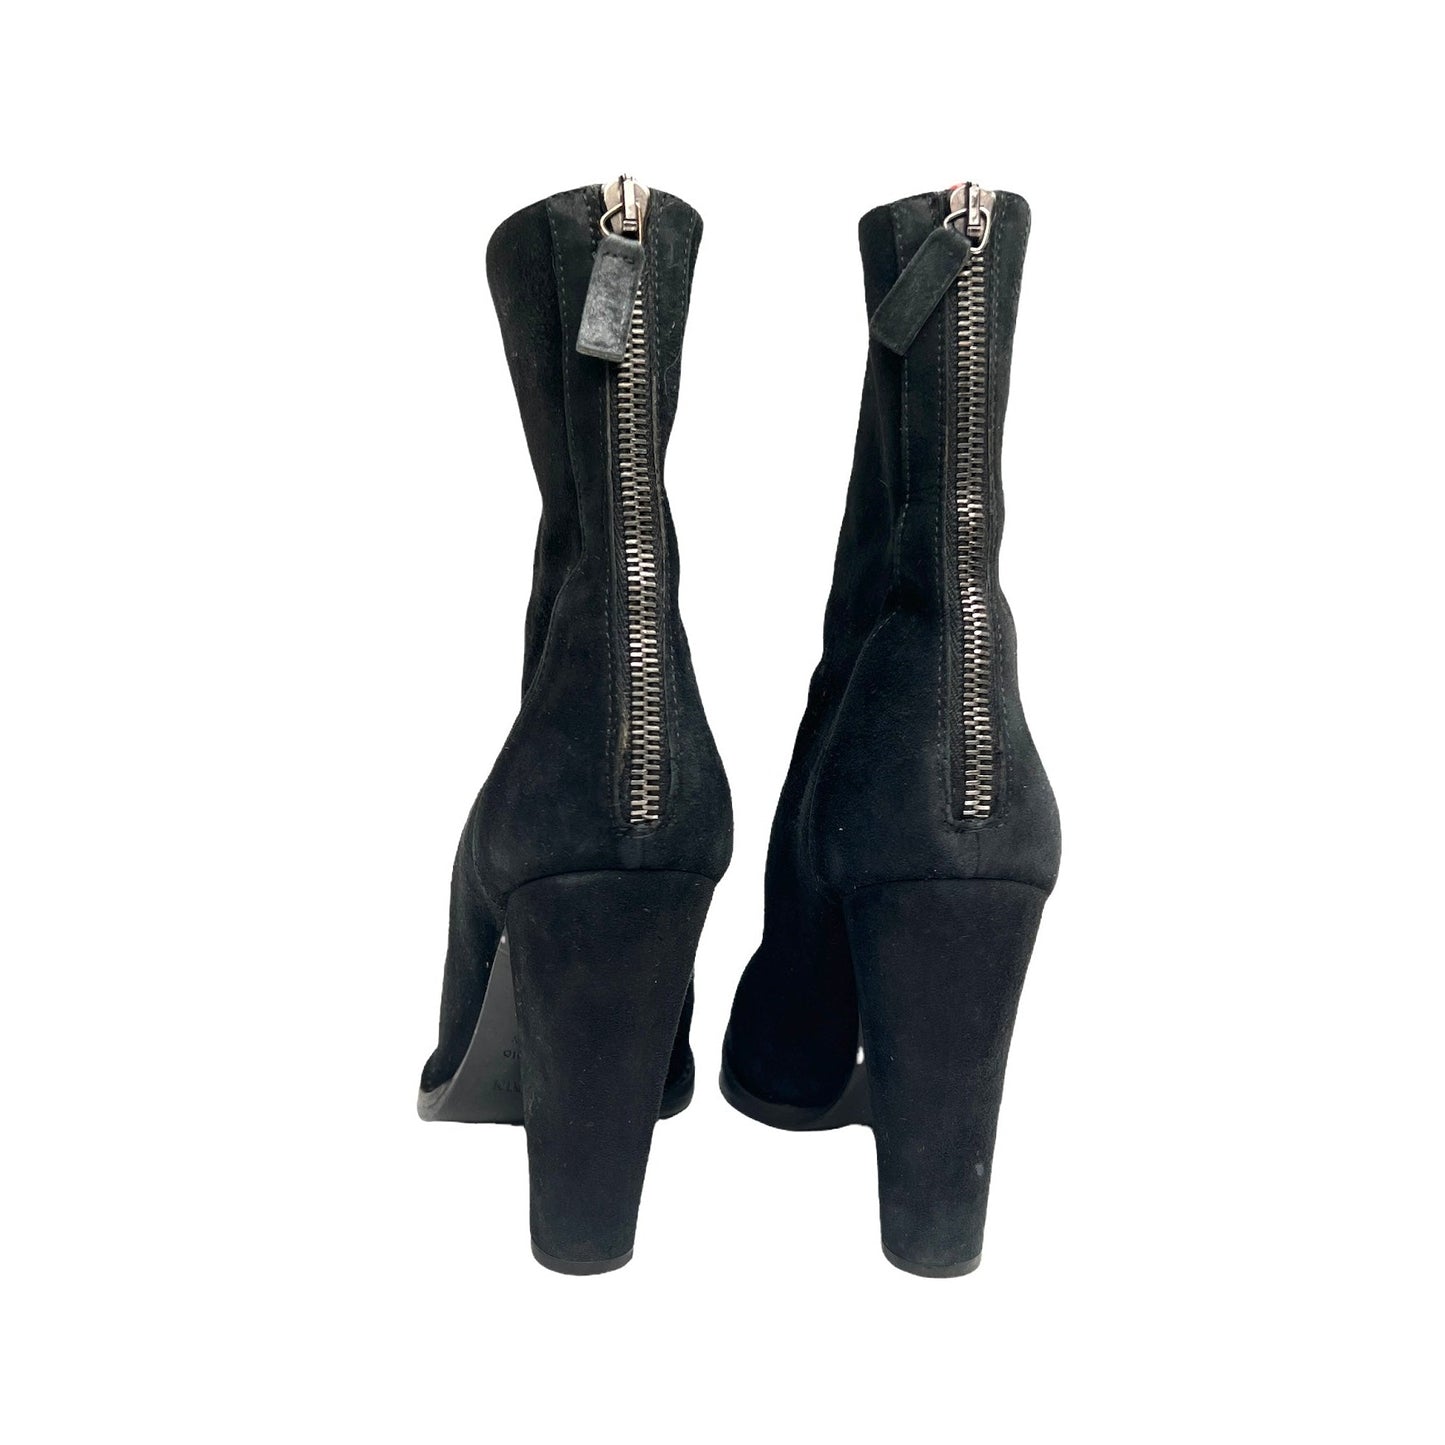 Black Suede Heeled Boots - 6.5